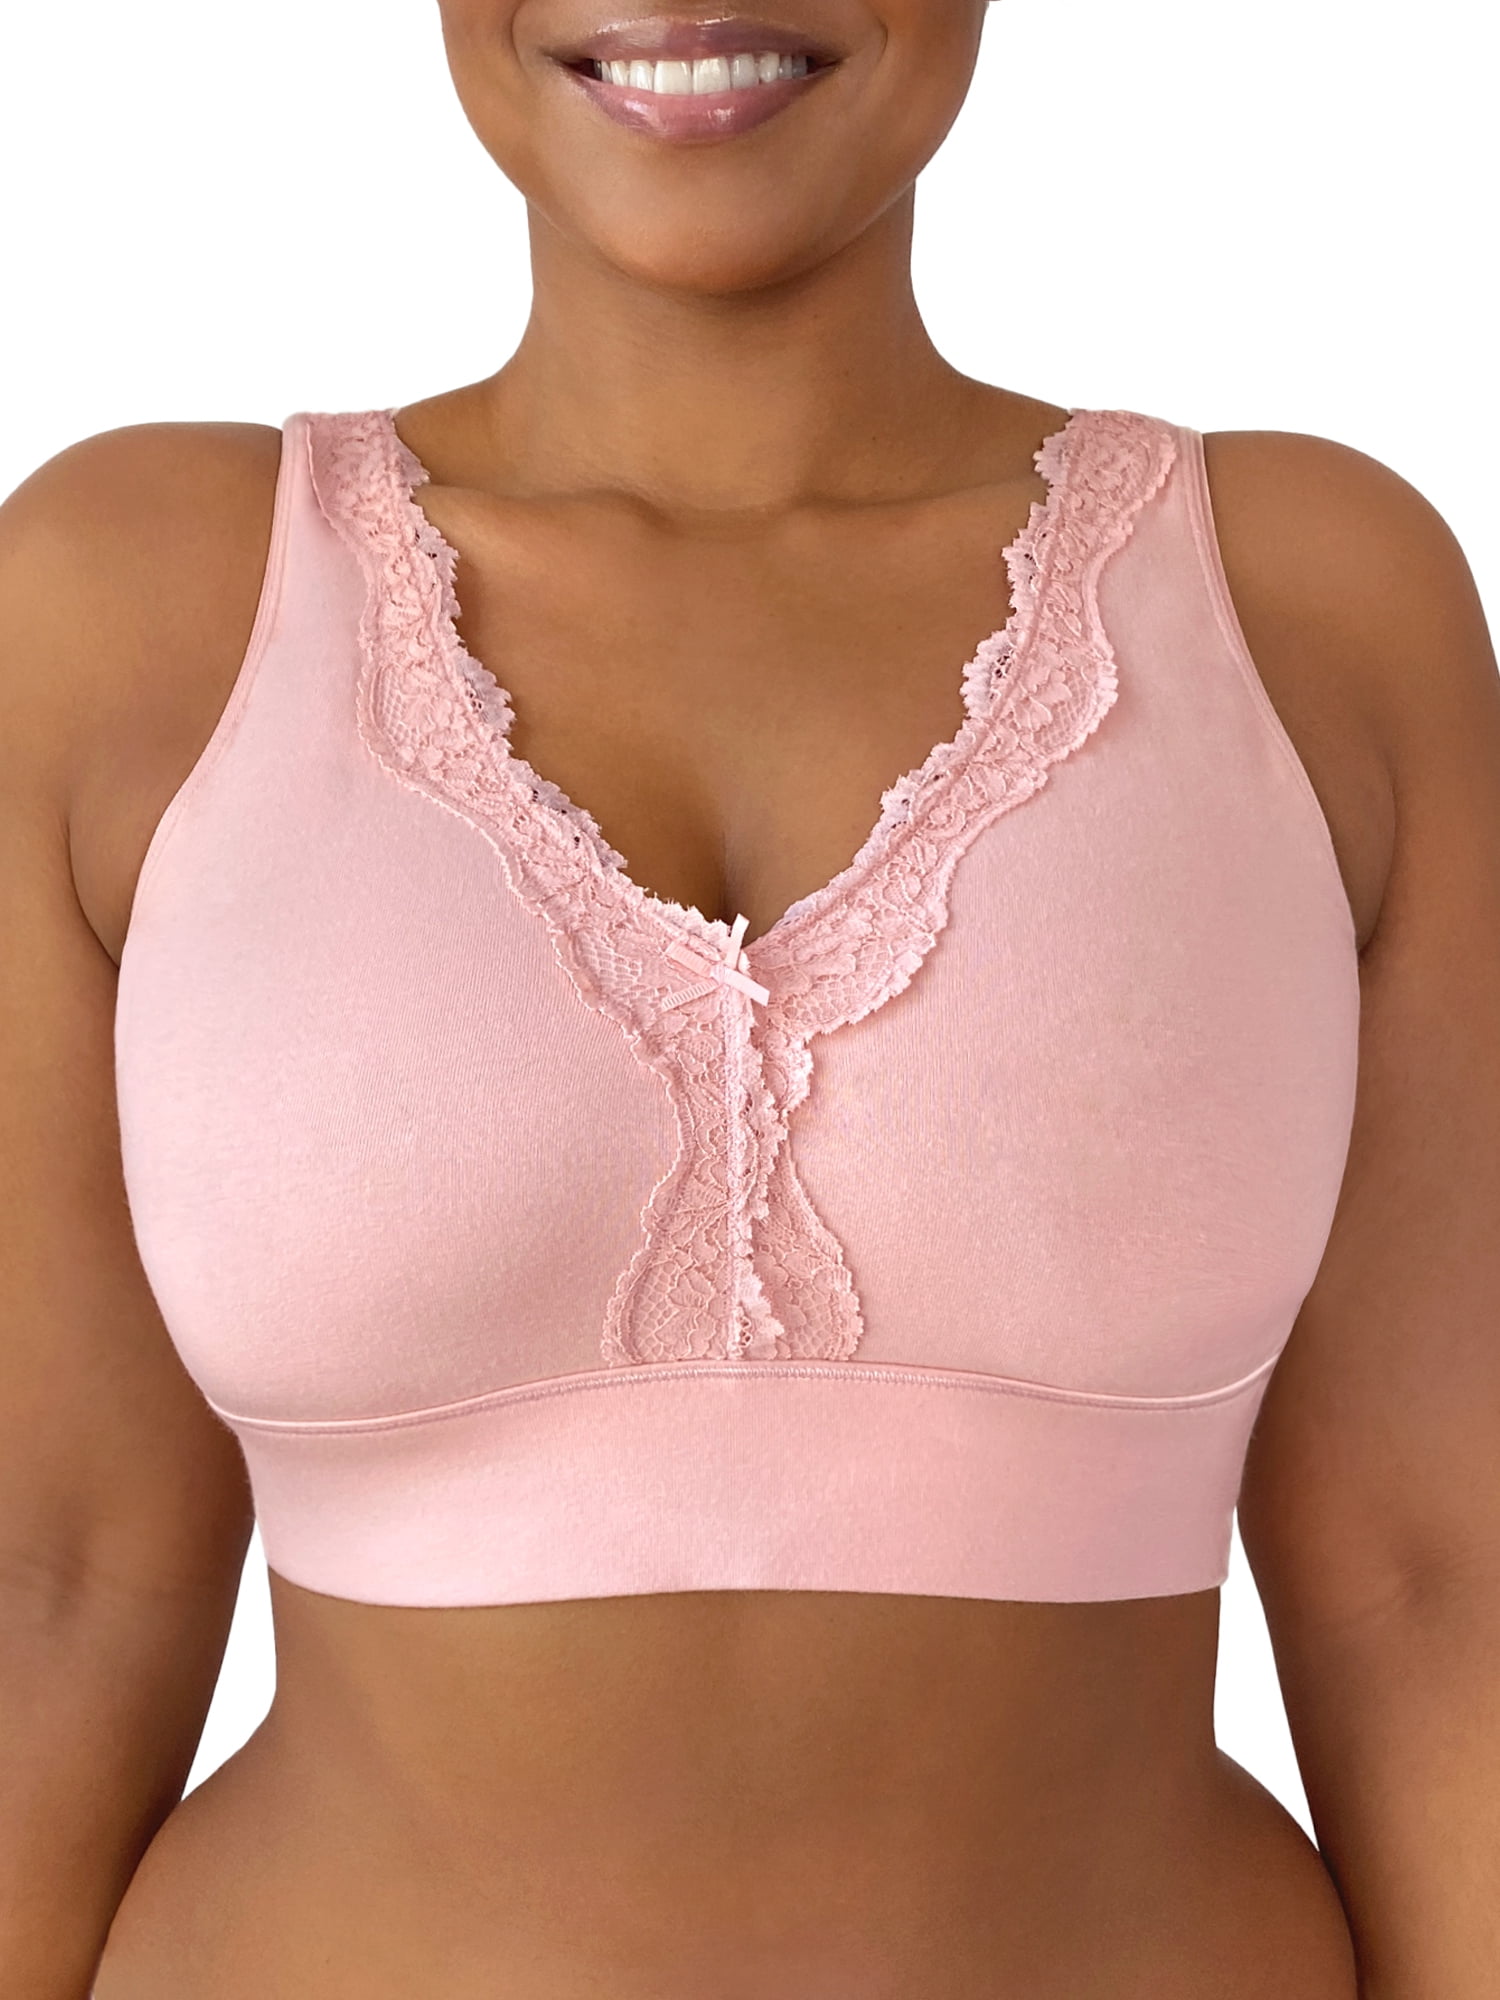 Fruit of the Loom Women's Back Smoothing Full Coverage Wireless Bralette, 2- Pack, Style FT842A 